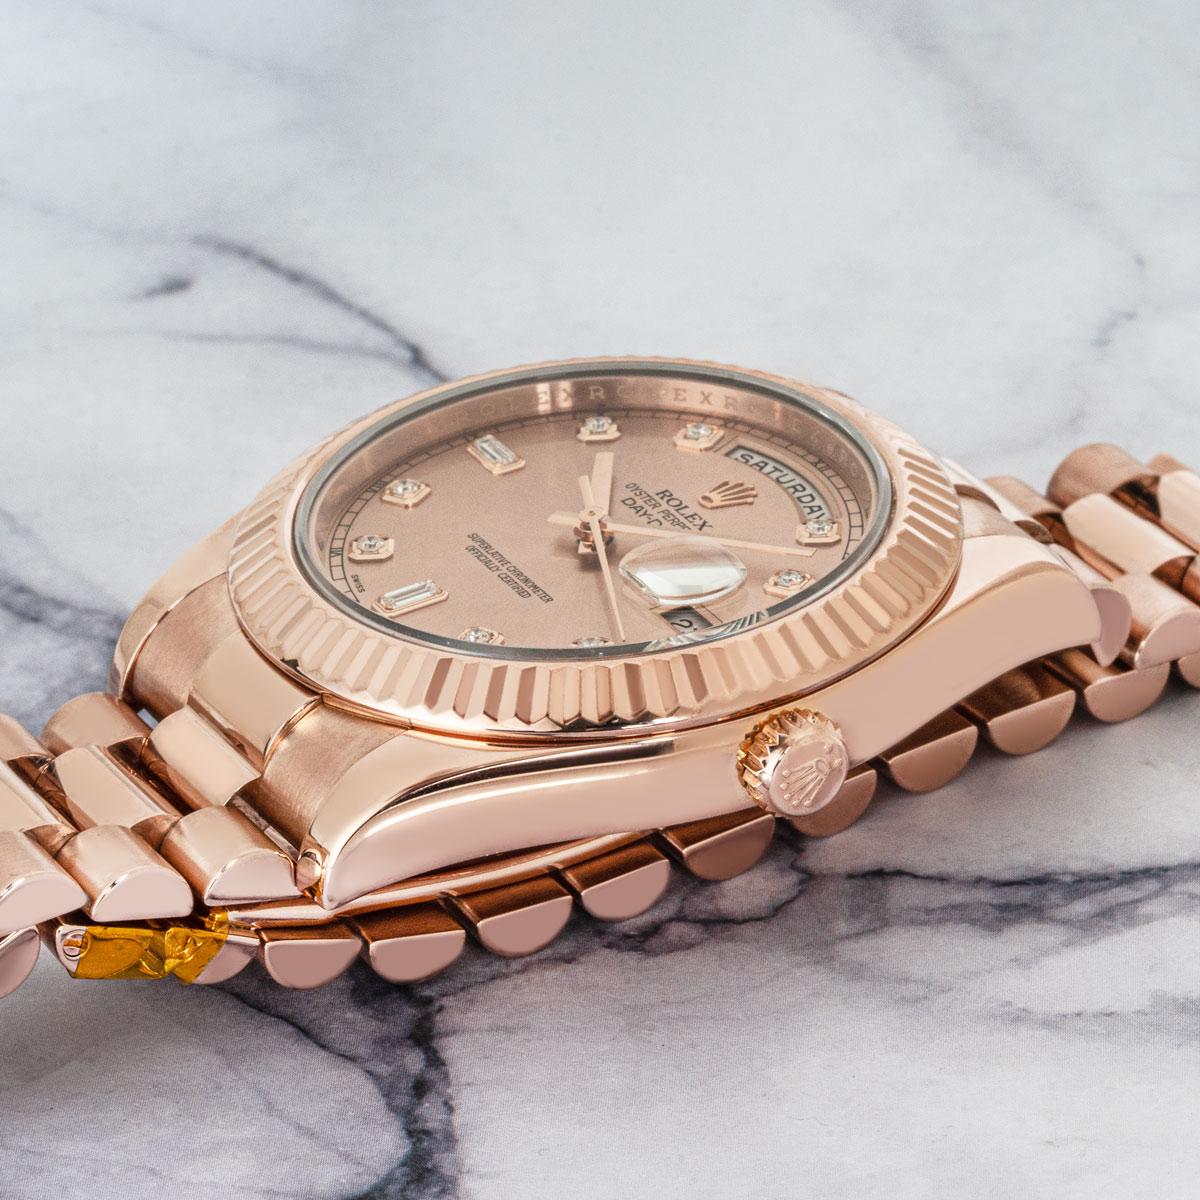 The discontinued 41mm Day-Date II by Rolex in rose gold. Featuring a rose dial set with 8 round brilliant cut diamonds and 2 baguette cut diamonds. The fluted bezel, president bracelet and concealed clasp are all signature features of a Day-Date.